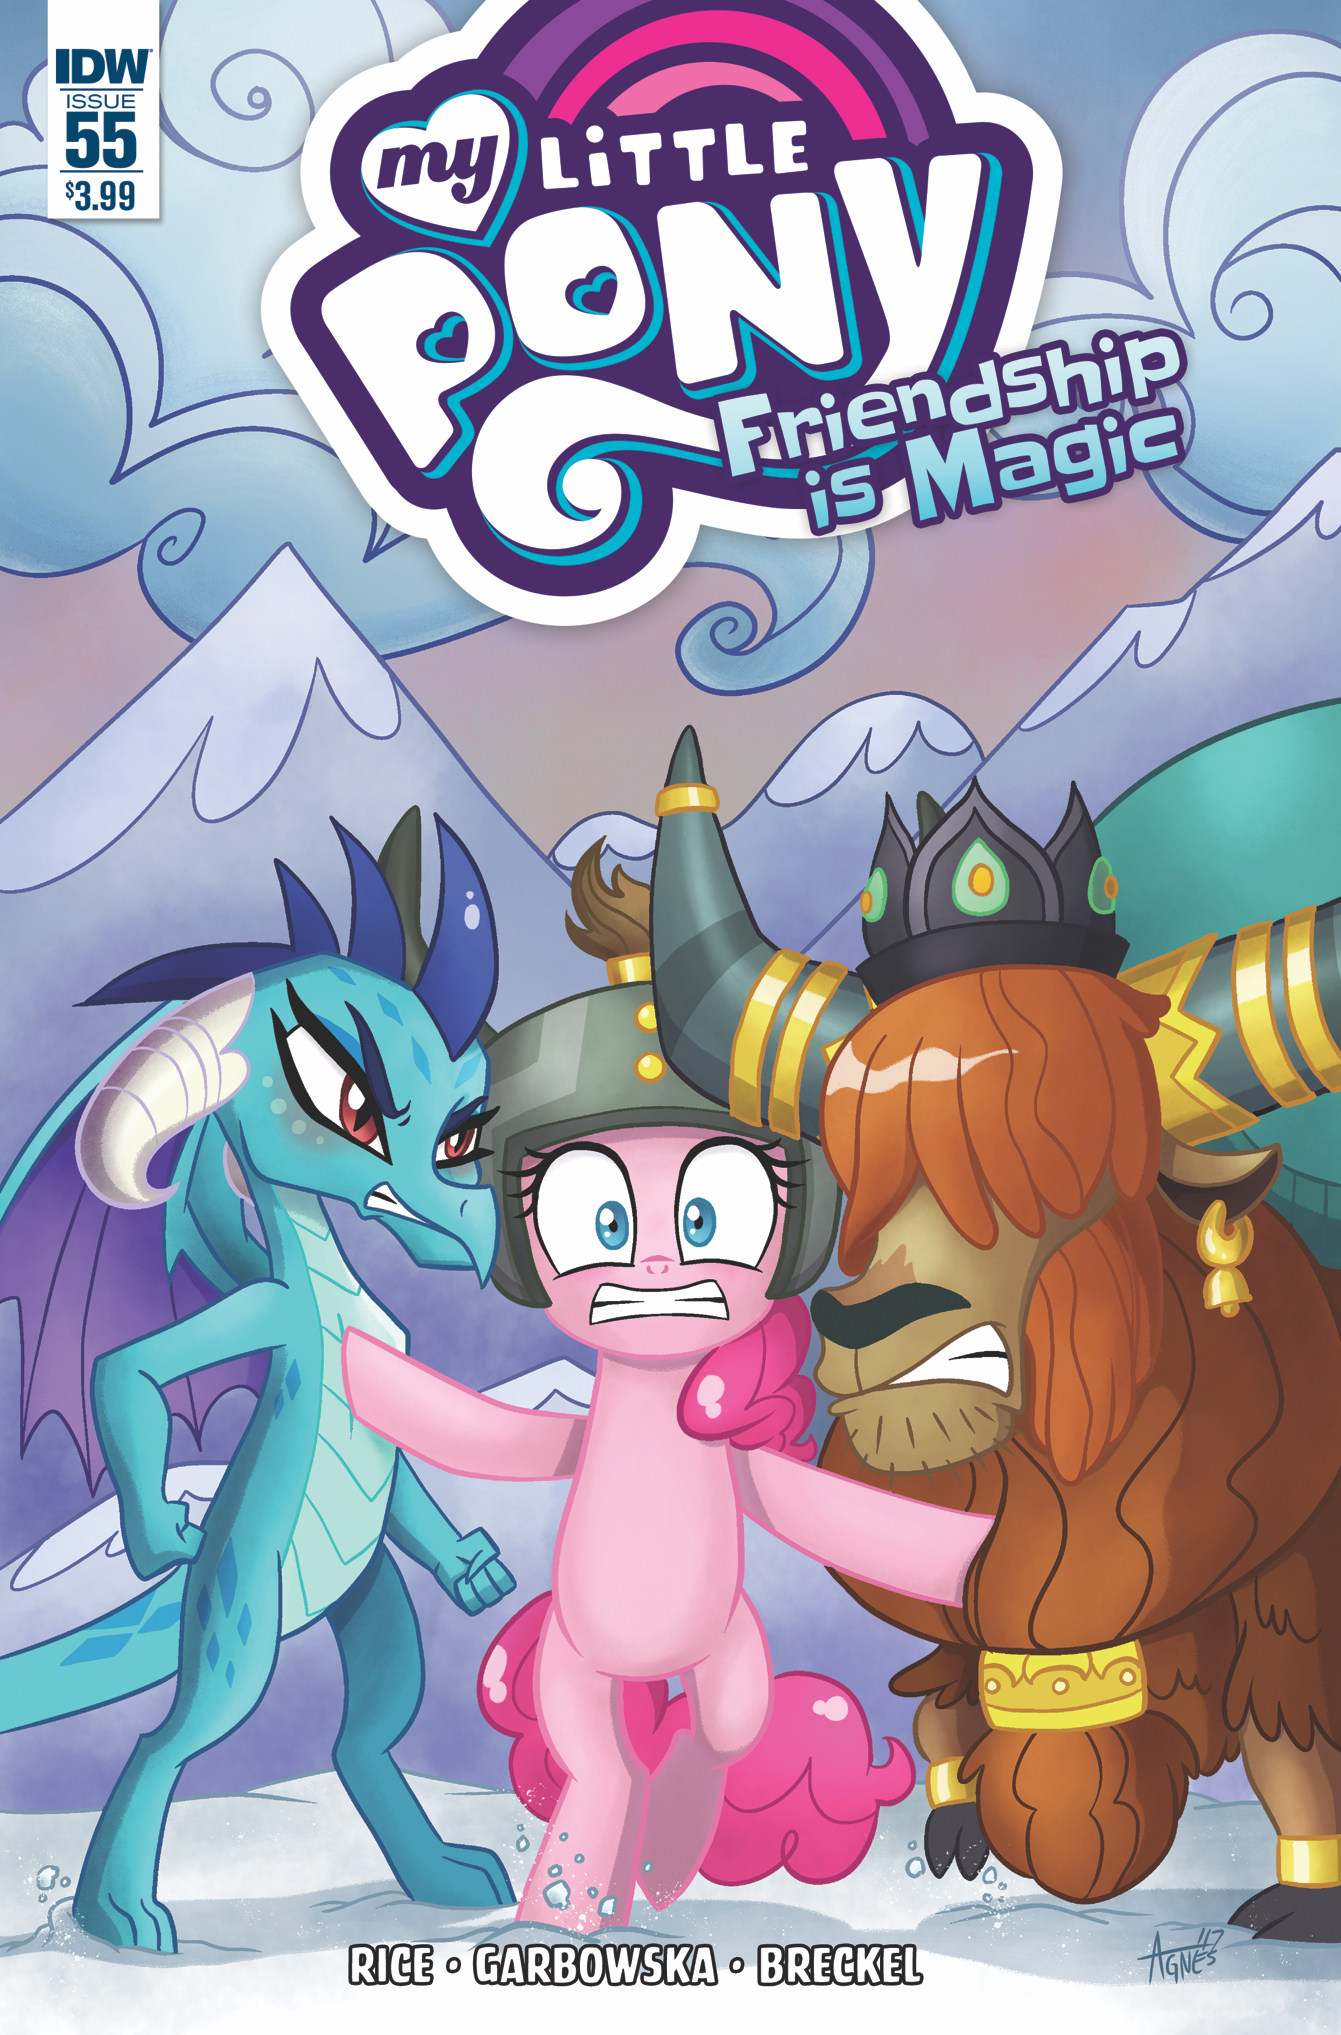 Cover to 'My Little Pony: Friendship is Magic #55'. Art by Sara Richard/IDW Publishing